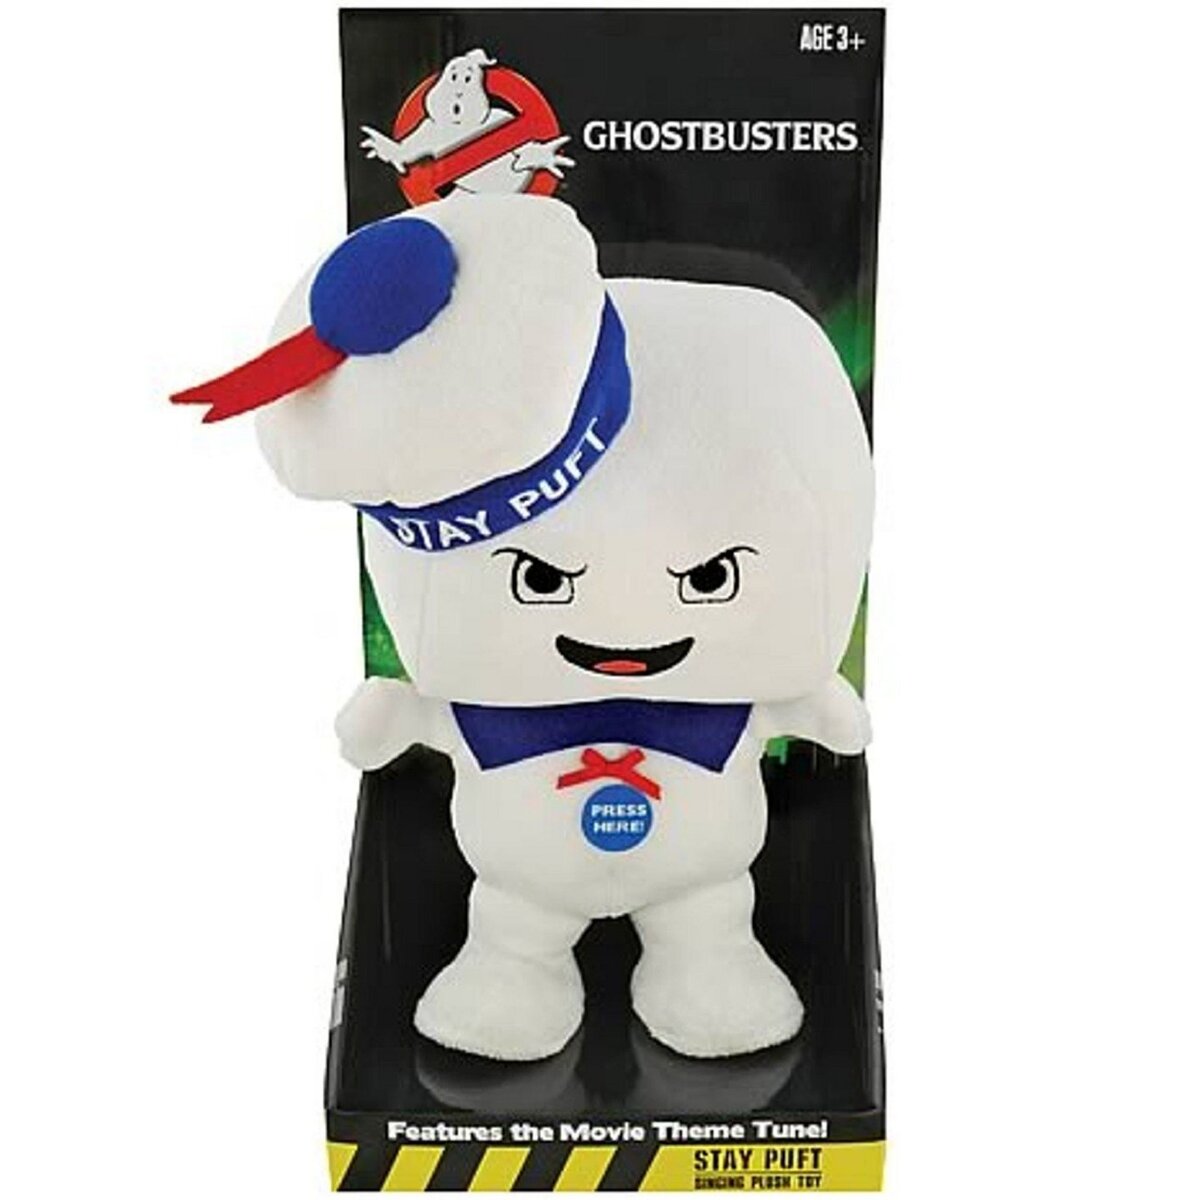 Peluche parlante Ghostbusters - Mad